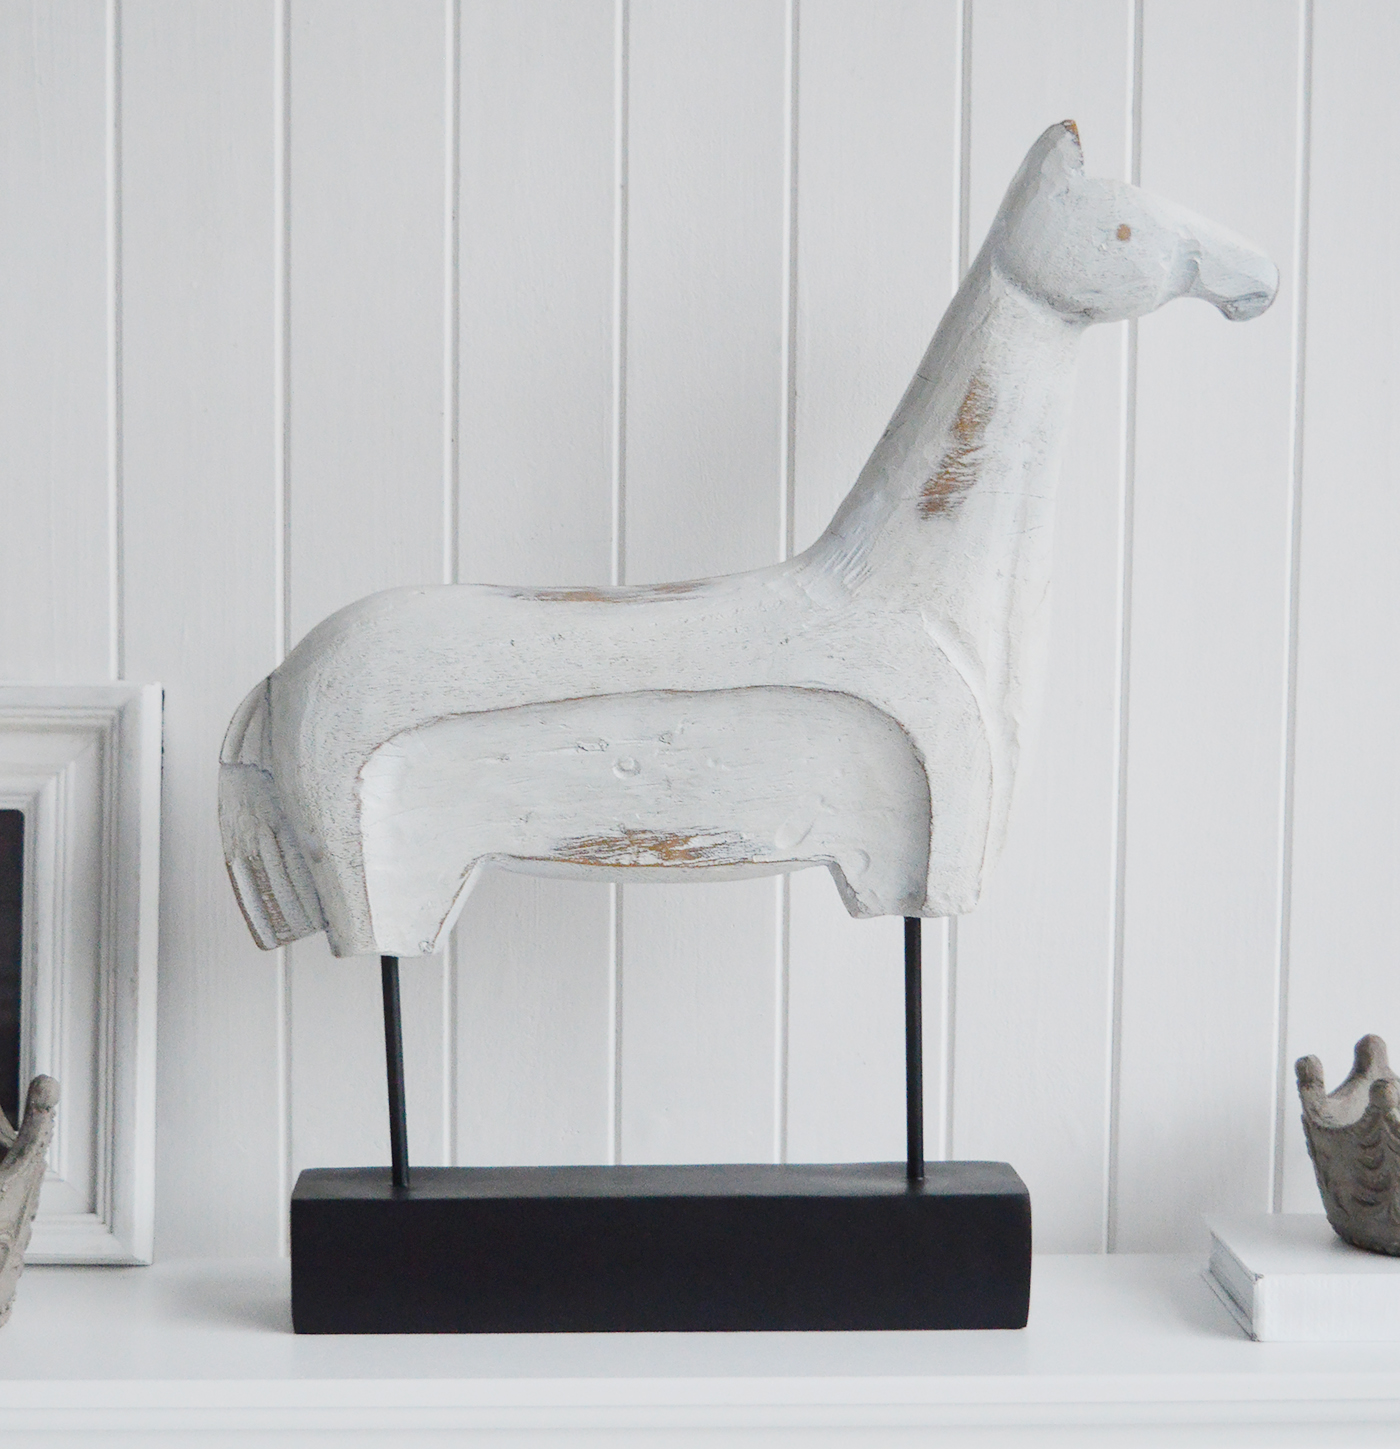 Decorative White Wooden Standing Horse. Console Table Decor for New England Style hallways and living rooms for coastal, country and city home interiors from The White Lighthouse